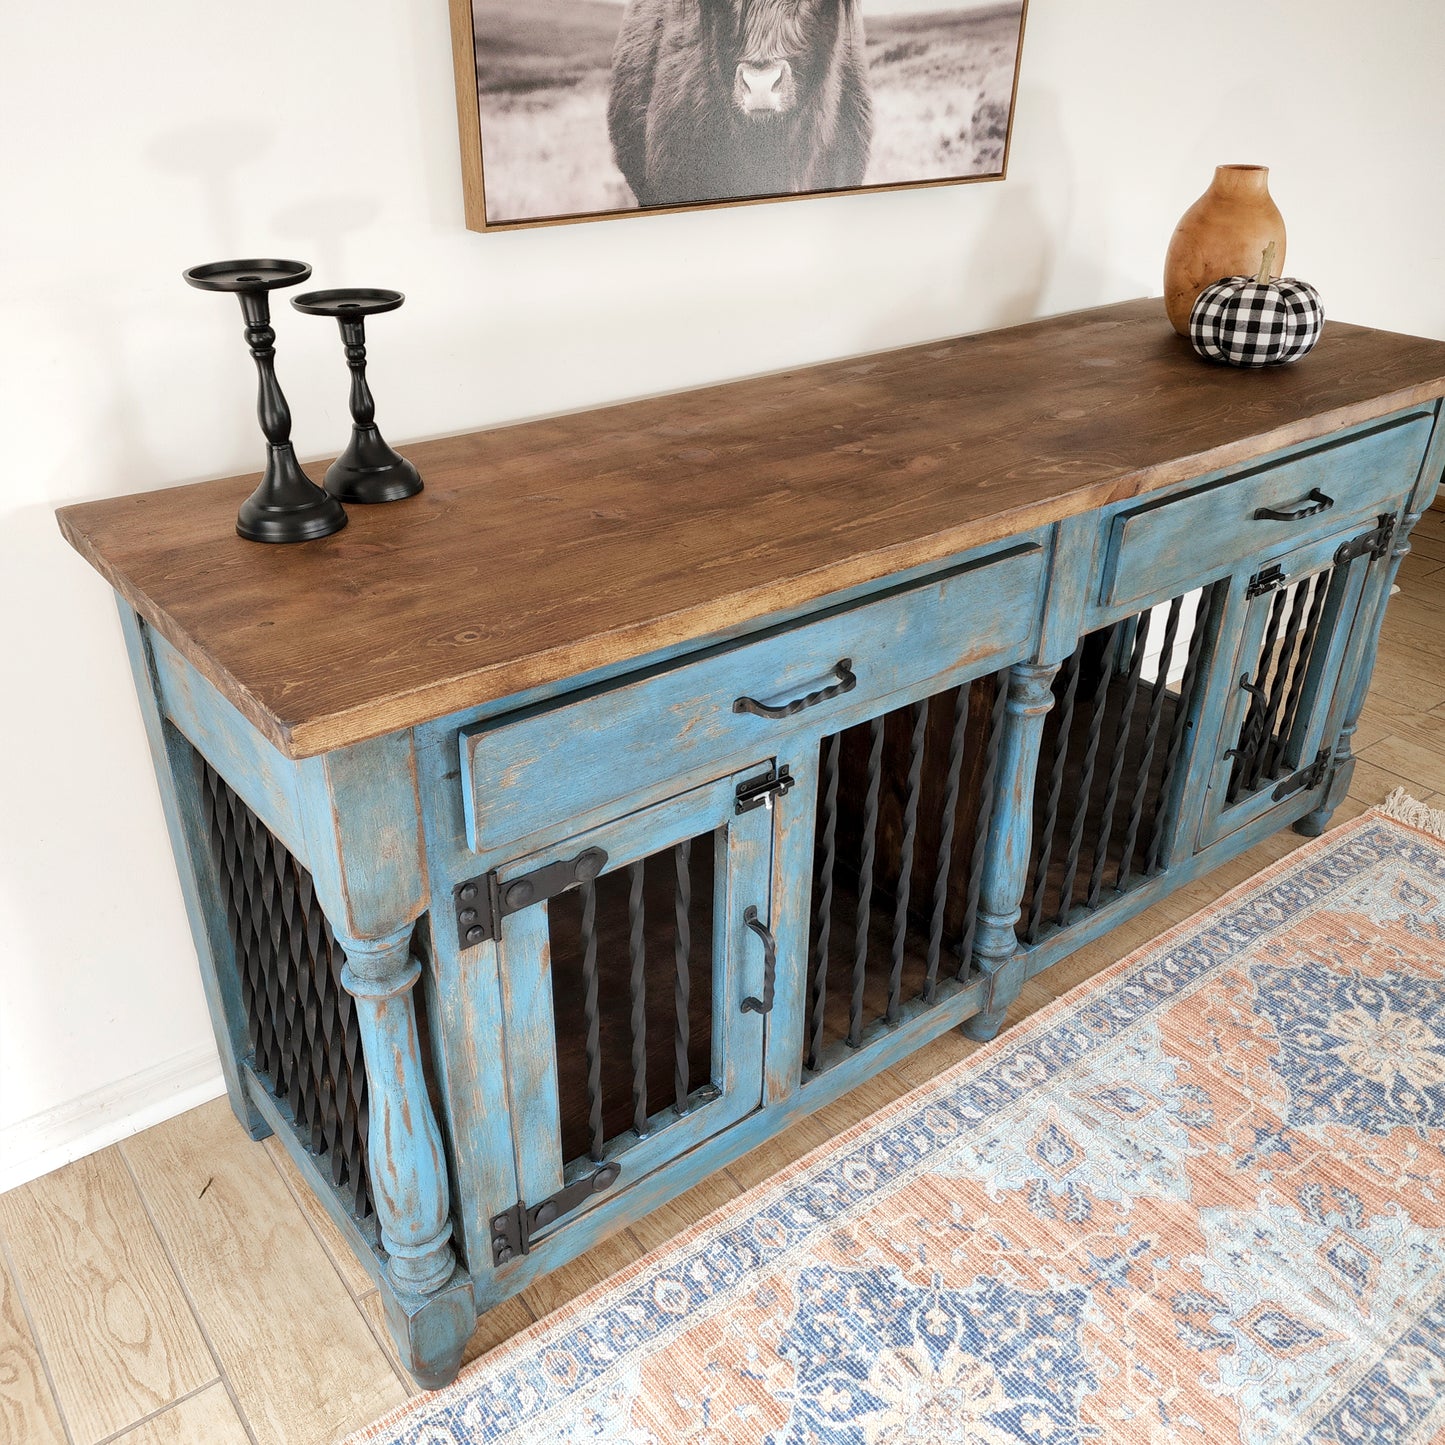 78"L x 24"W x 36"H - Unique Double dog crate furniture - Buffet dog kennel  [Patent Pending] Product - The Dog Branch Large double dog crate furniture, Custom wood dog kennel, Farmhouse handcrafted woodworking, XXL size dog kennel, barn sliding door cabinet, wood dog crates, distressed white, wood stain dog kennels